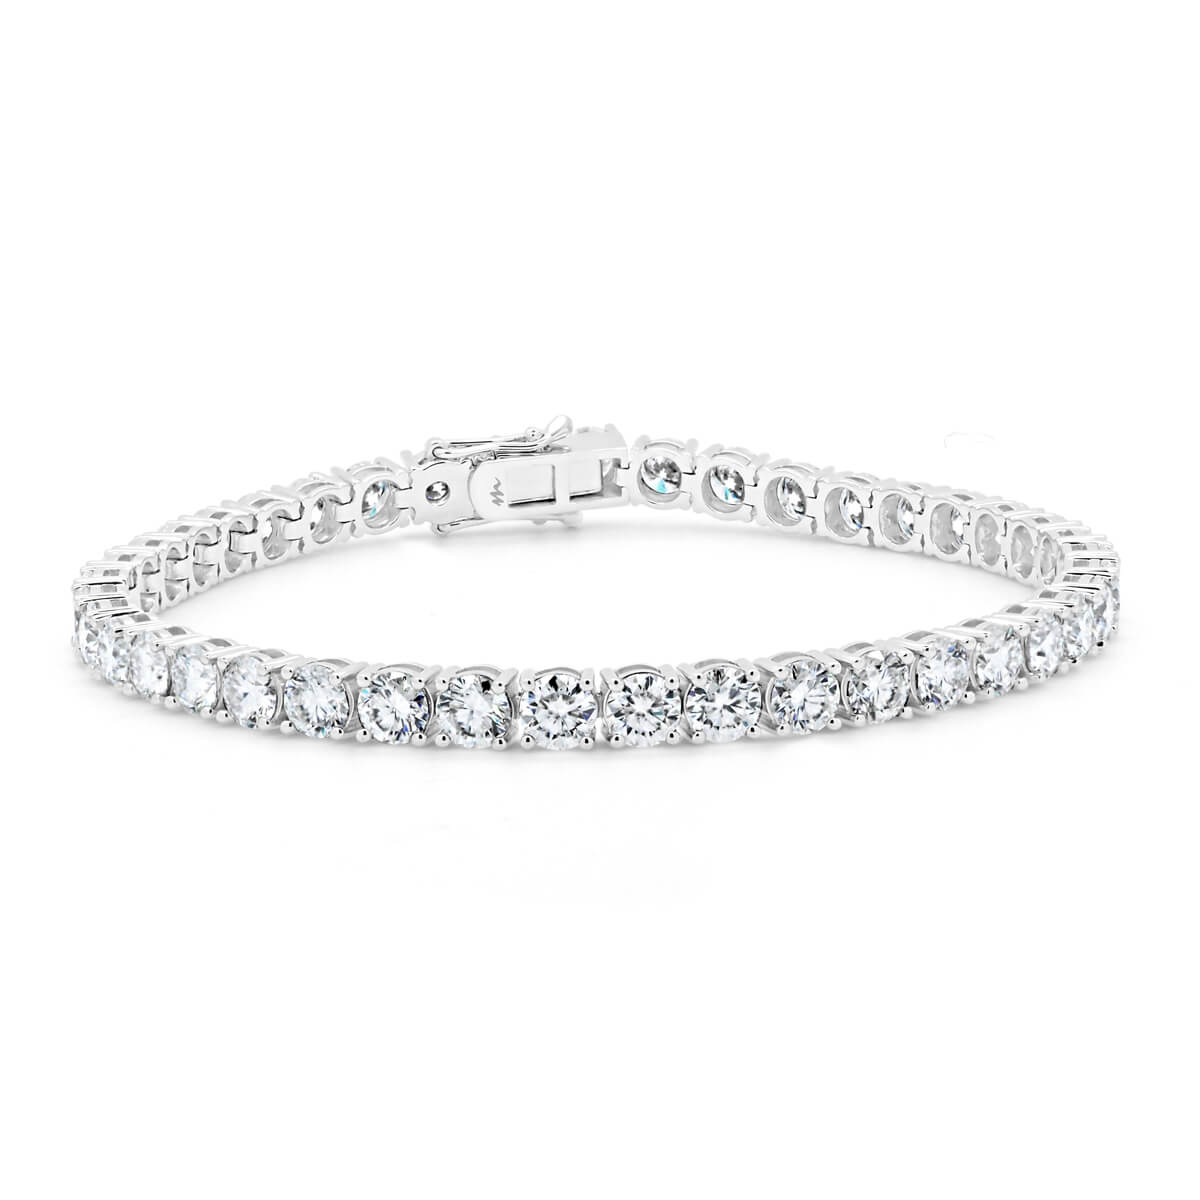 Mikayla 4.0 Sn Classic 4-Prong Tennis Bracelet In 18K Gold With Safety Clasp